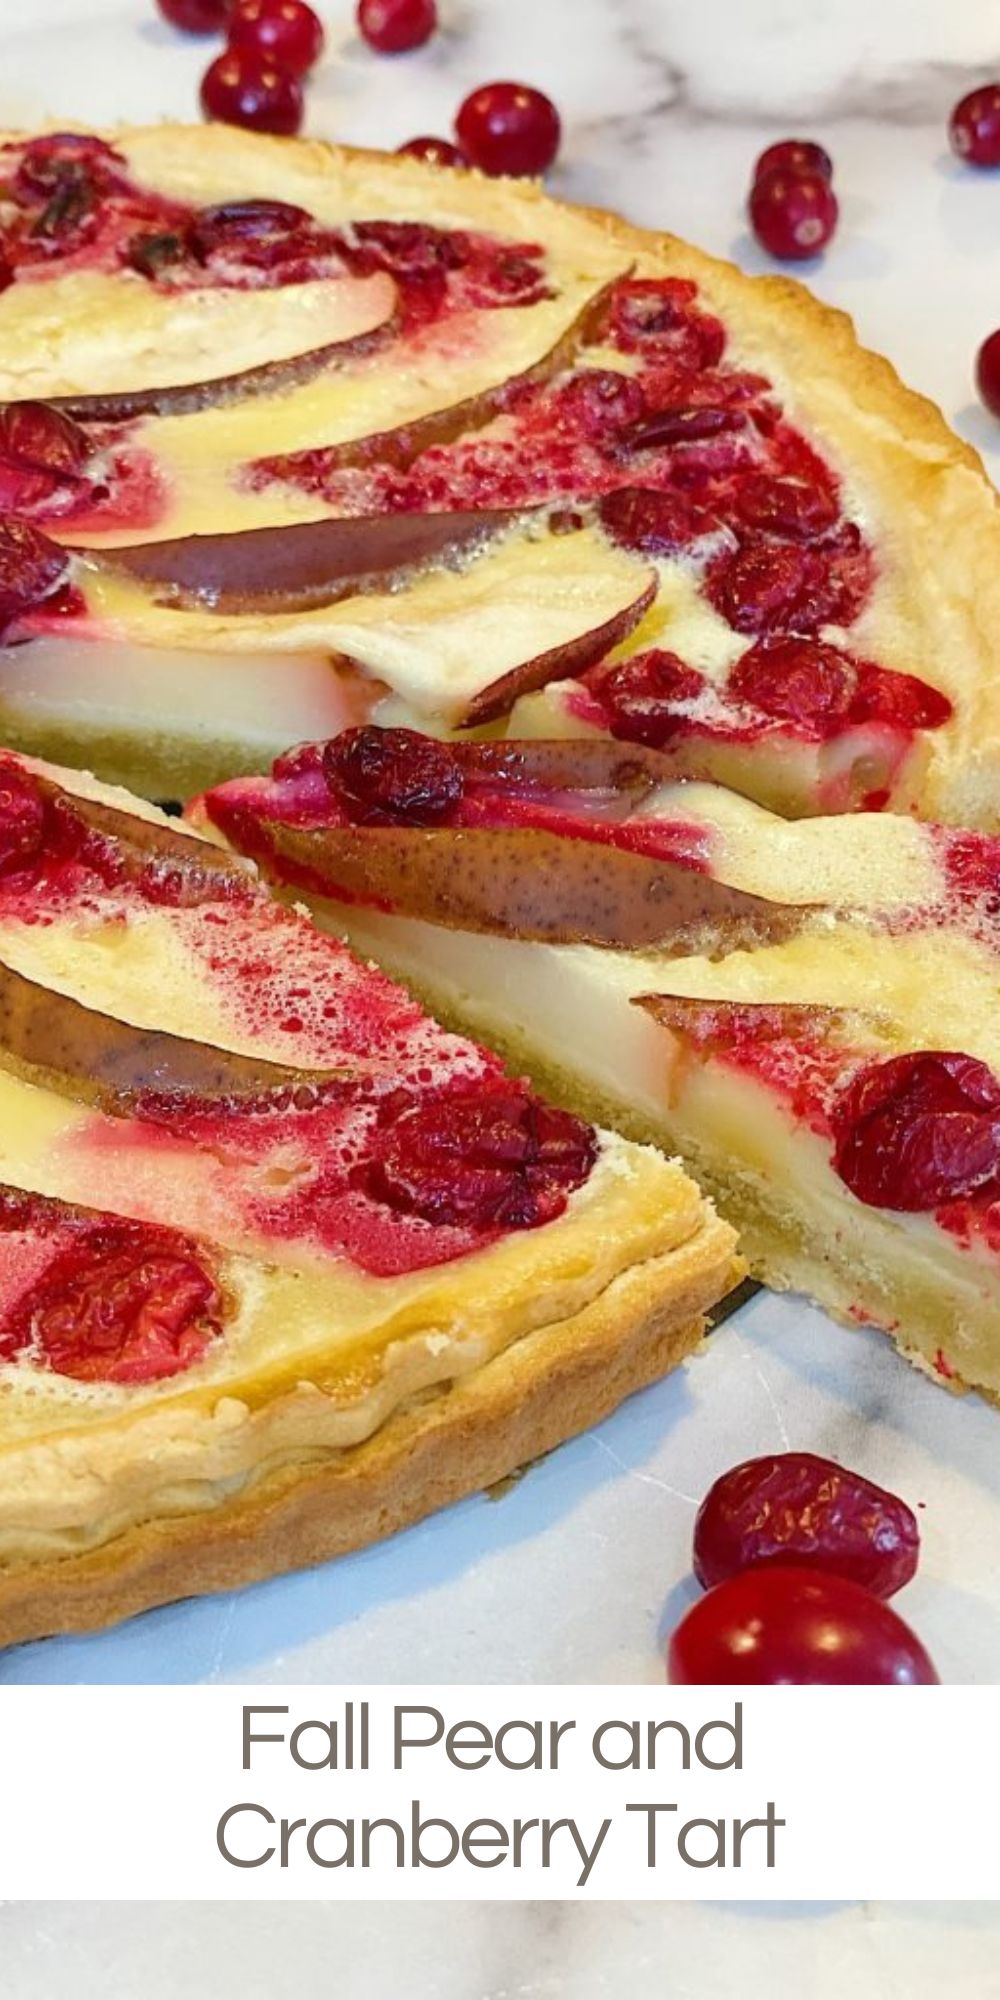 This fall pear and cranberry tart is amazing. It is a perfect combination of sweet and tart and this is a must recipe for fall baking.